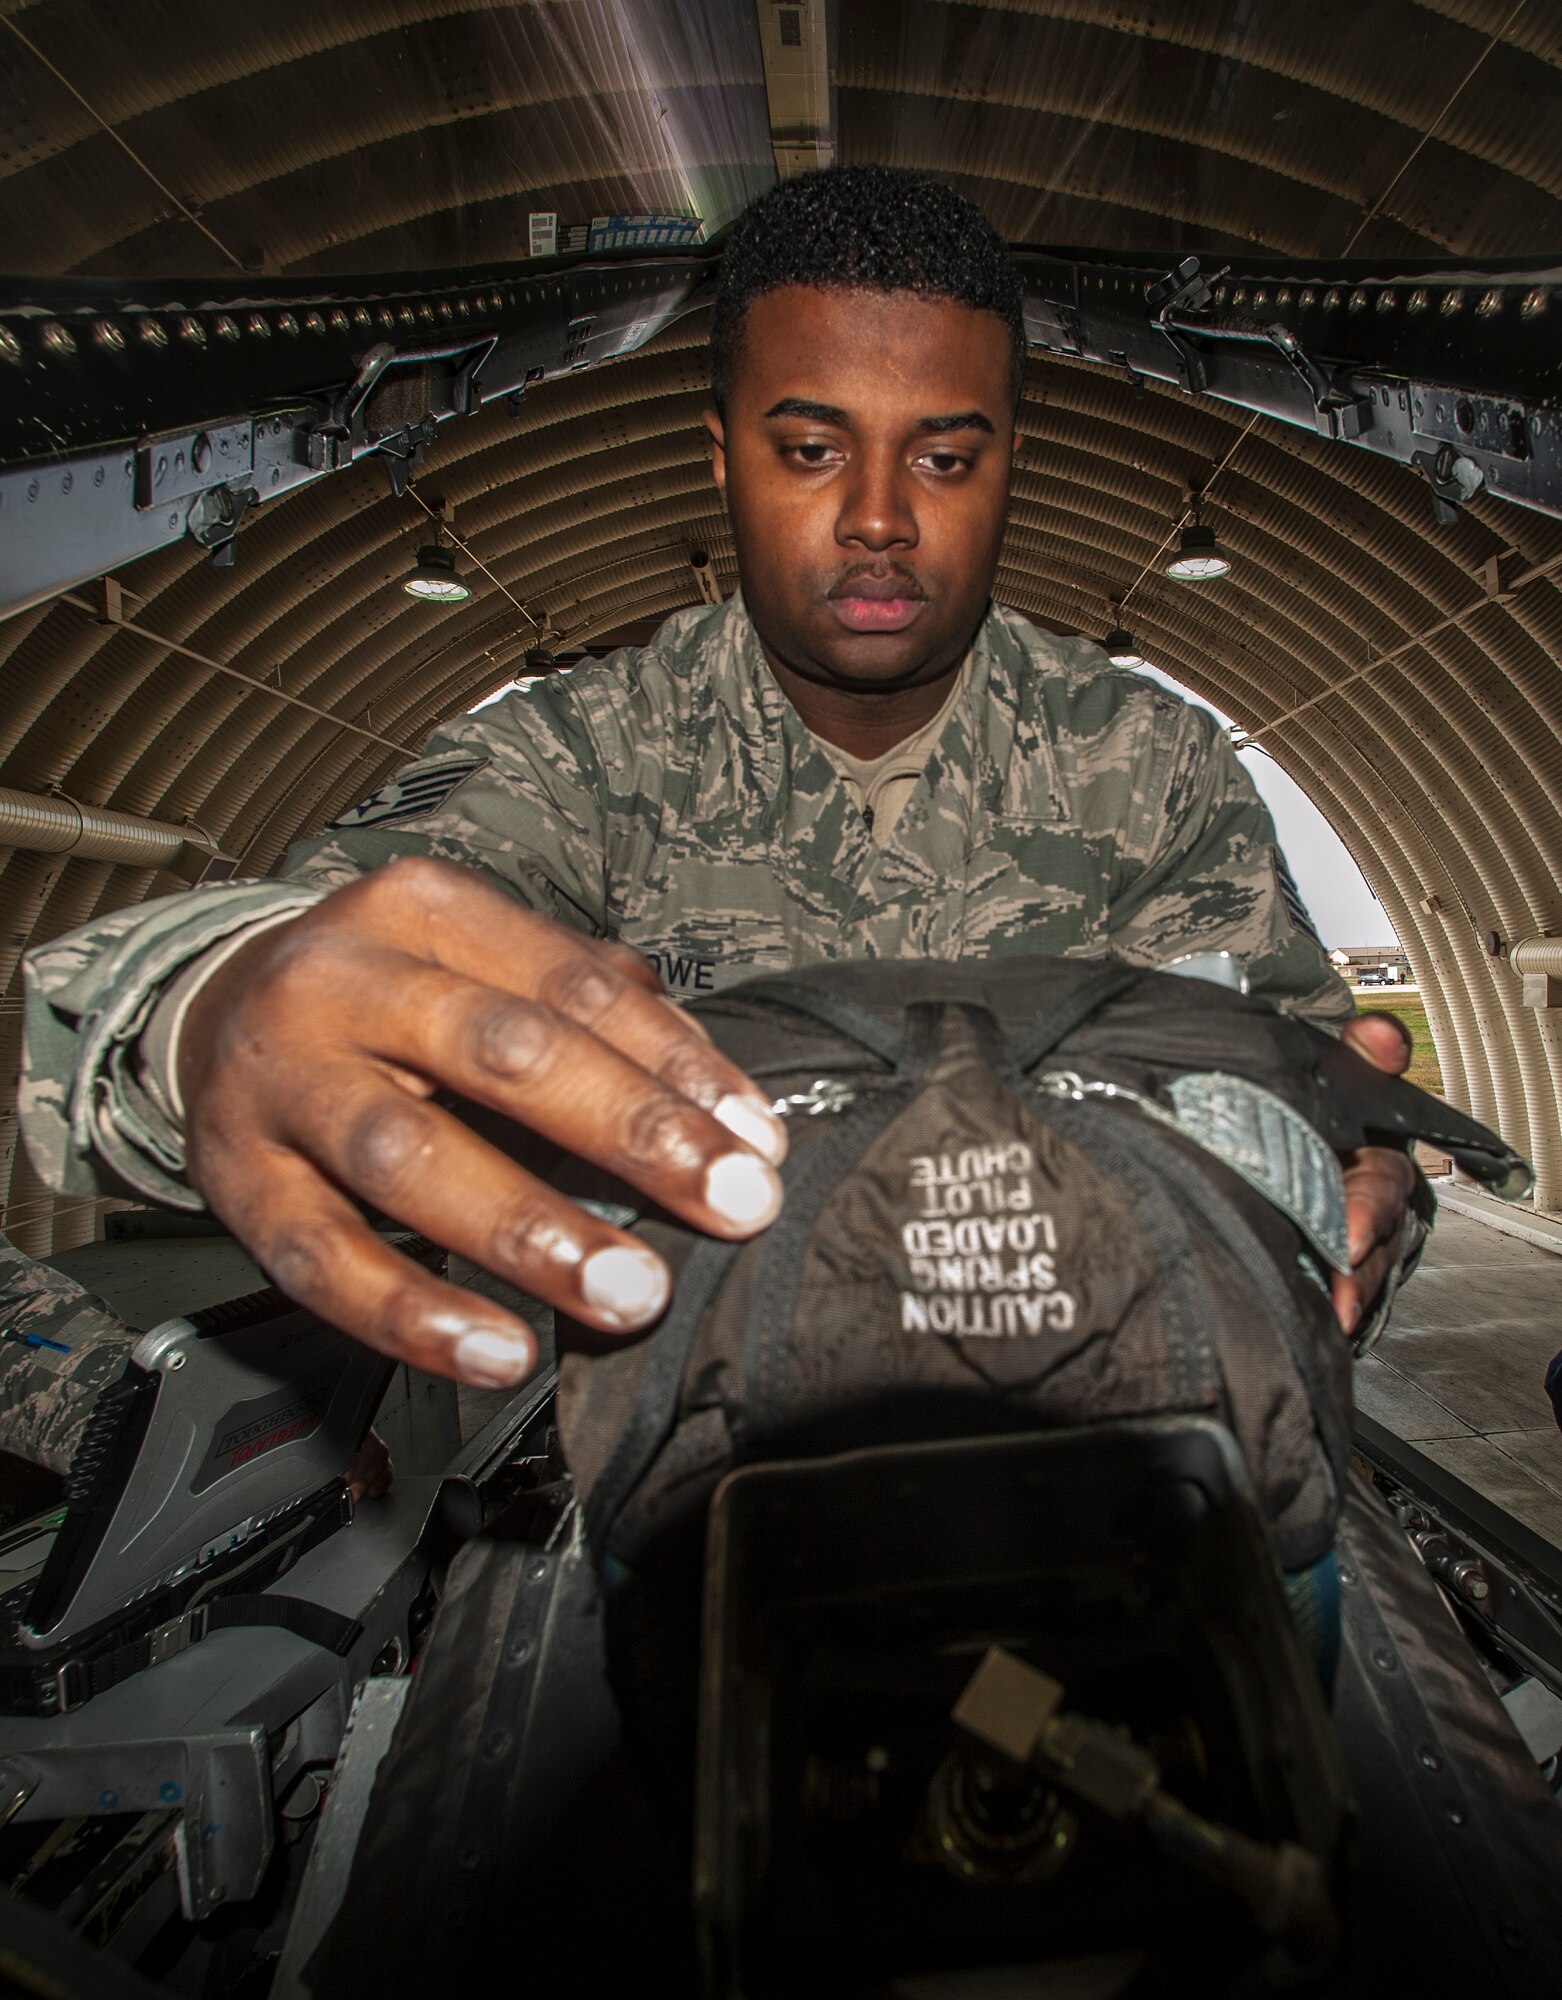 Staff Sgt. Angelo Lowe, 8th Maintenance Squadron egress craftsman, performs an inspection on the landing gear of an F-16 Fighting falcon at Kunsan Air Base, Republic of Korea, Oct. 29, 2015. These recurring inspections are used to visually identify any issues or concerns that could interfere with a pilot’s ejection. (U.S. Air Force photo by Staff Sgt. Nick Wilson/Released)